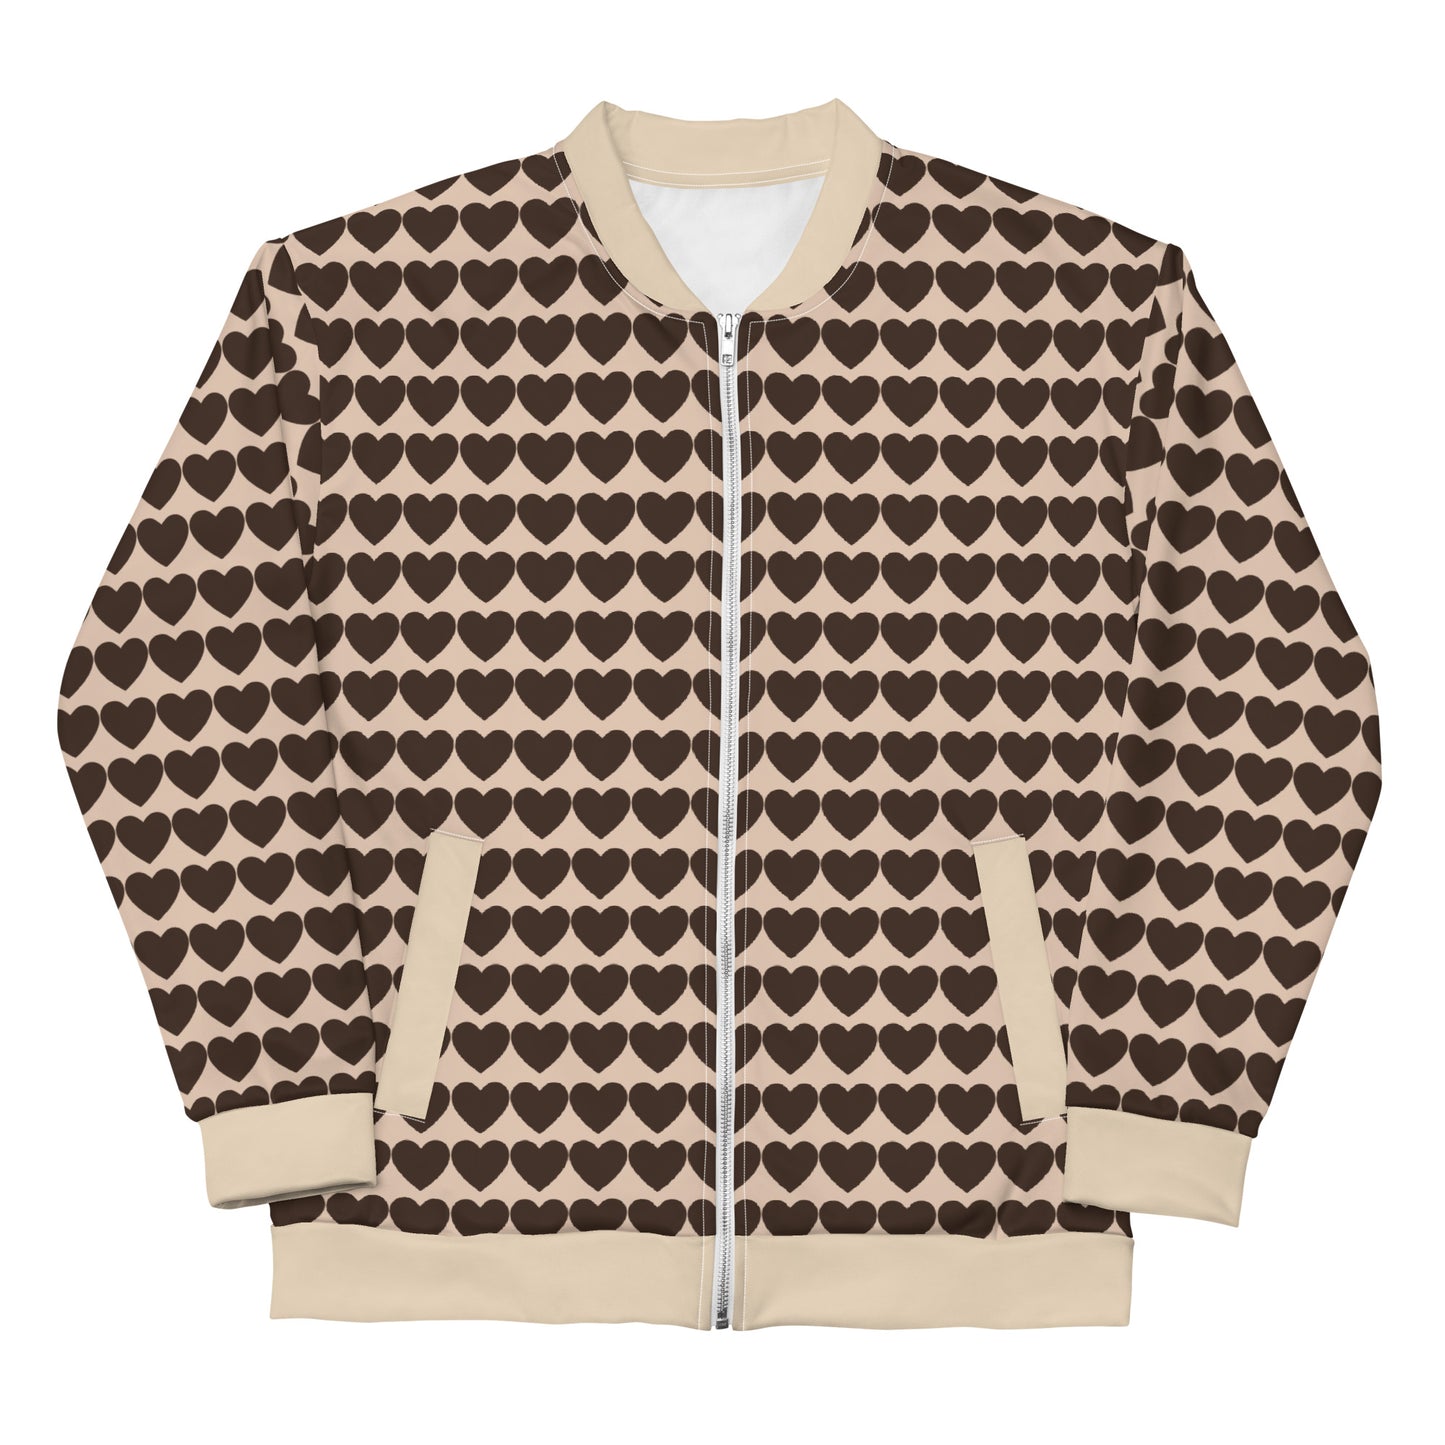 Heart Pattern - Inspired By Harry Styles - Sustainably Made Bomber Jacket